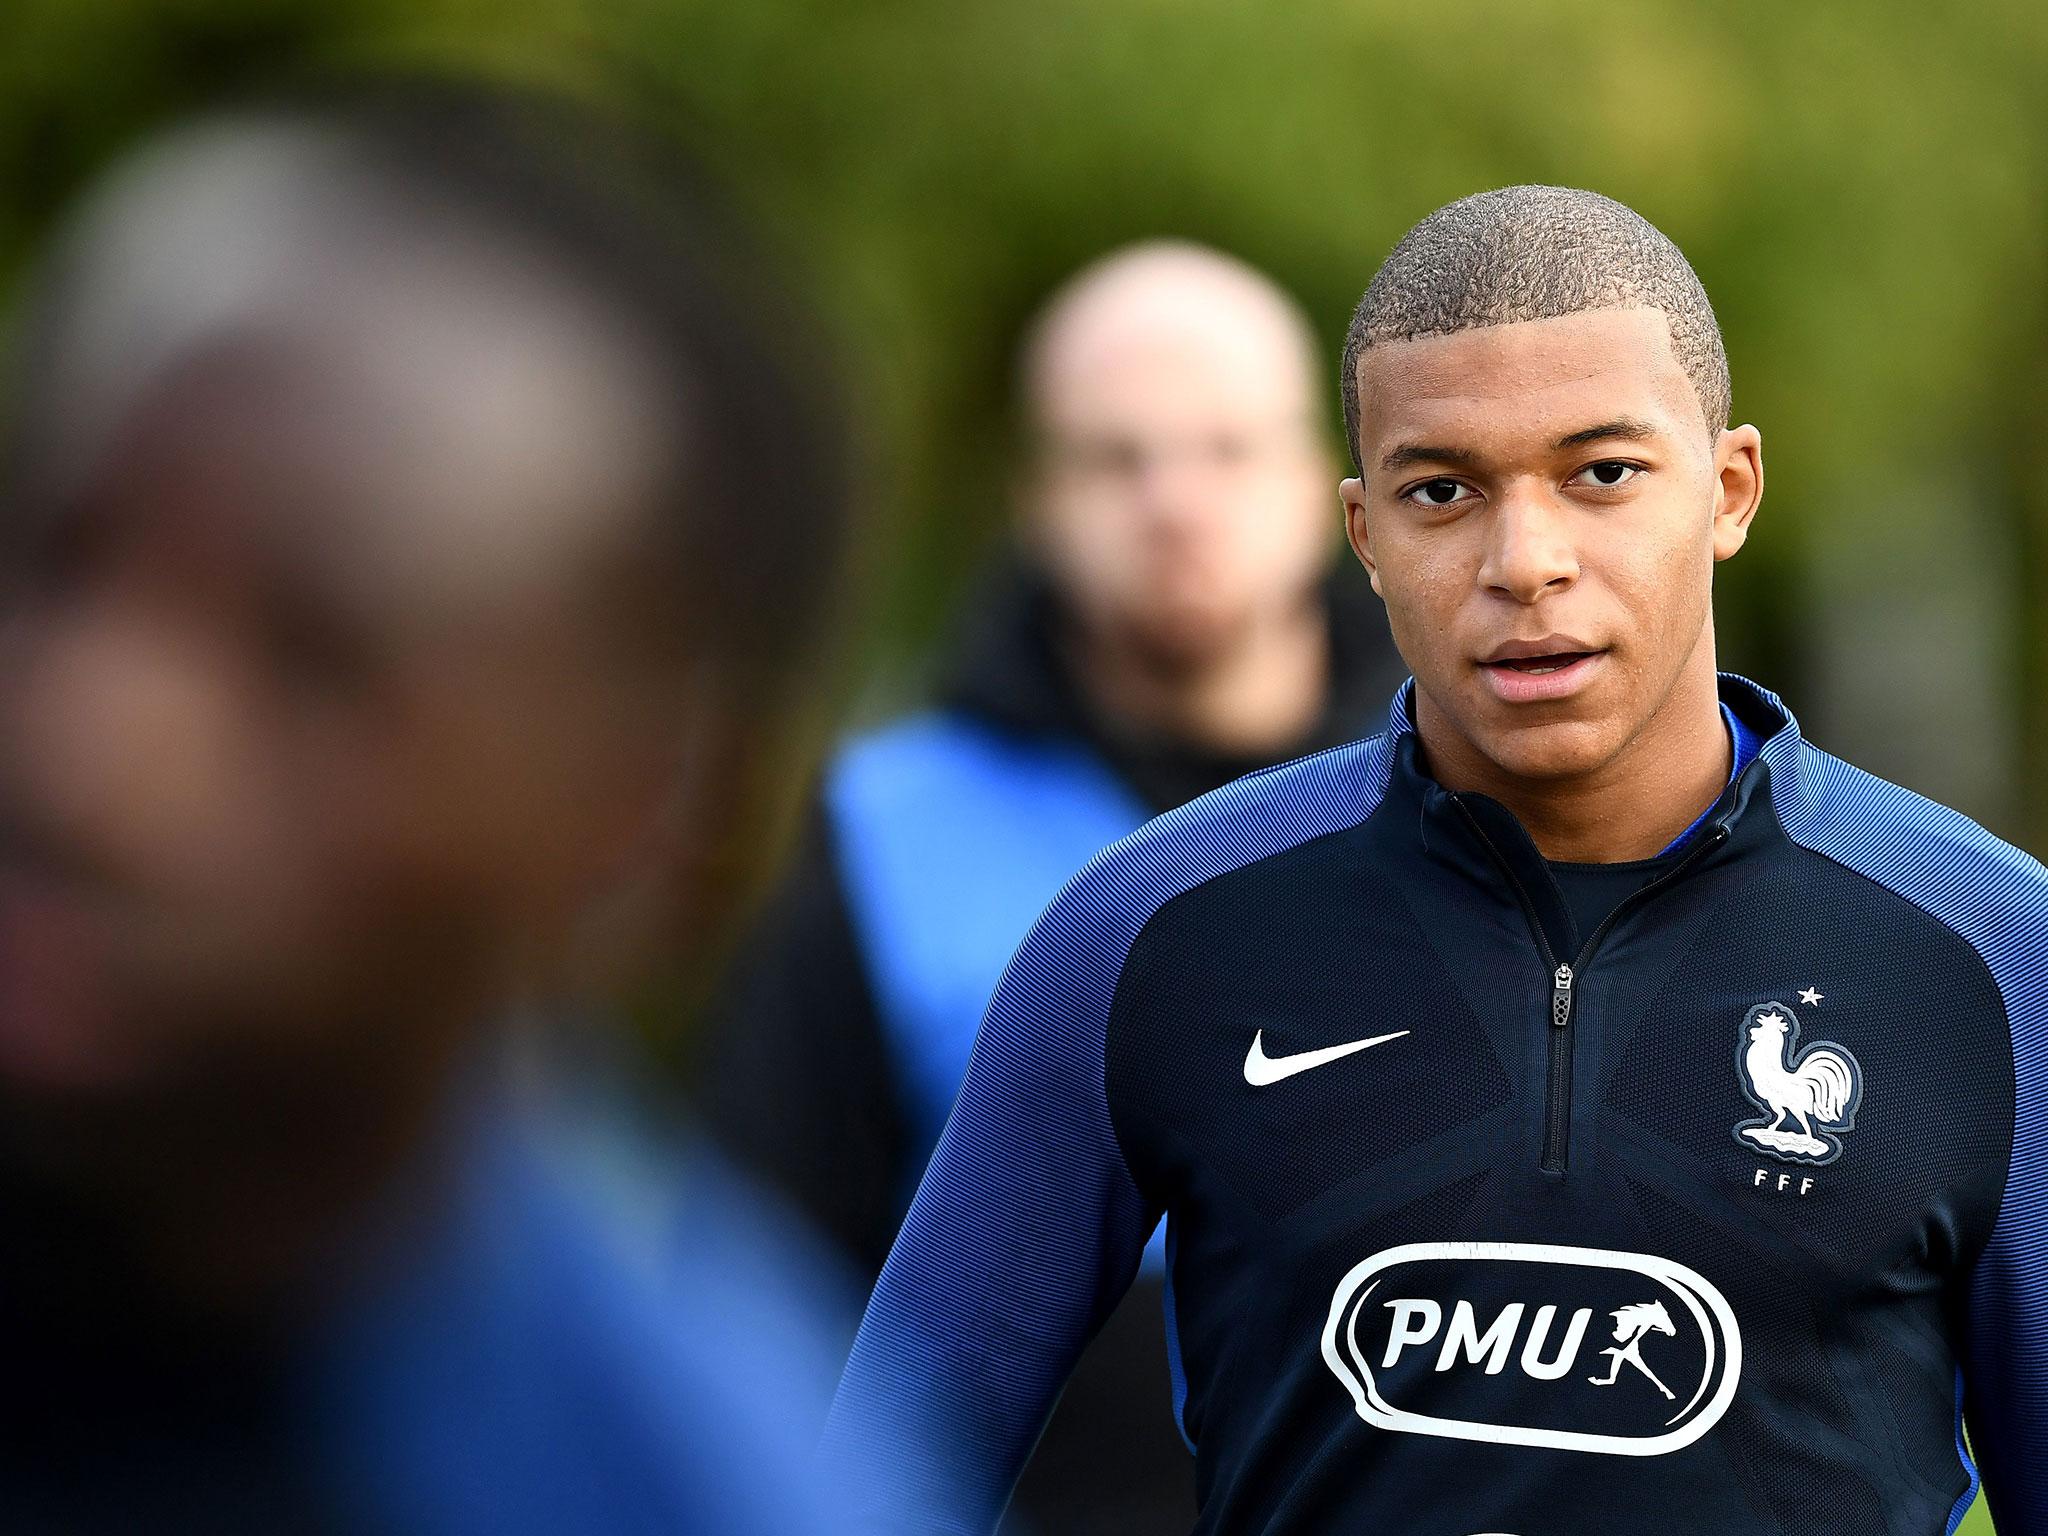 Kylian Mbappe joined PSG on loan this summer